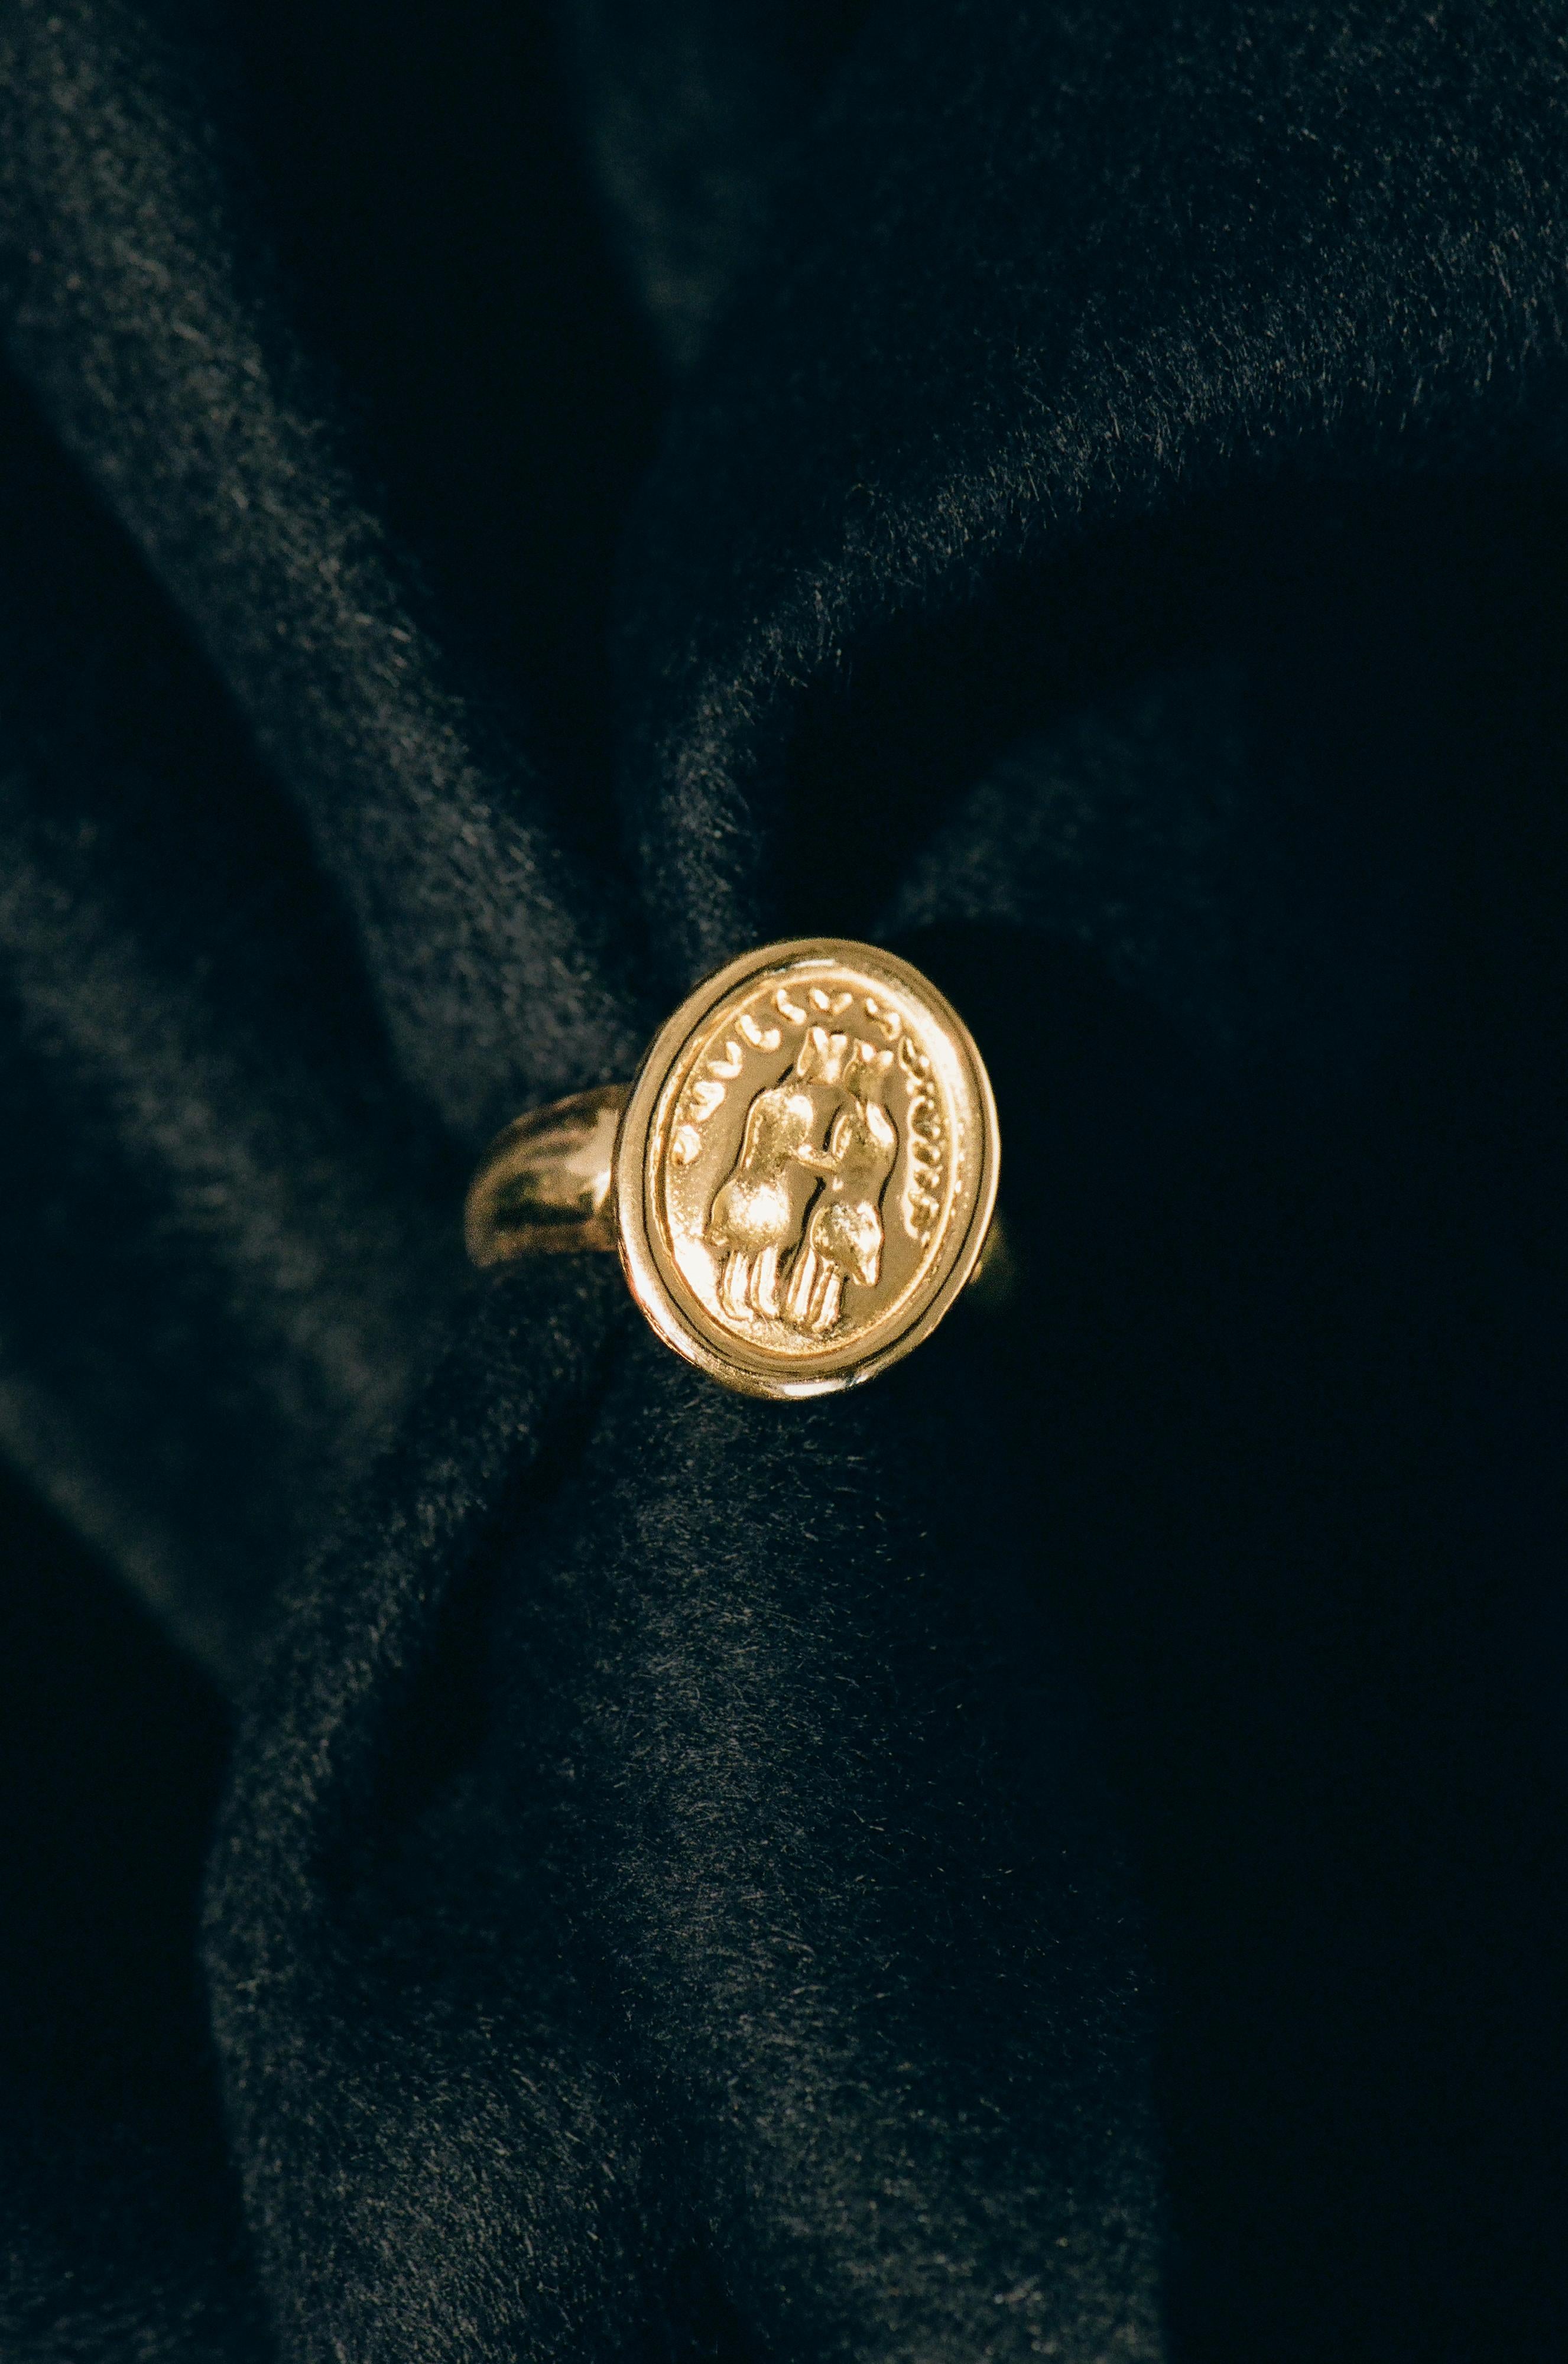 A one-of-a-kind signet ring featuring a reverse hand-carved motif depicting a duo of lovers. At once refined and pleasingly weighty, this refined ring is crafted from 18k recycled gold and detailed with a reverse, signet-style hand-carving from an